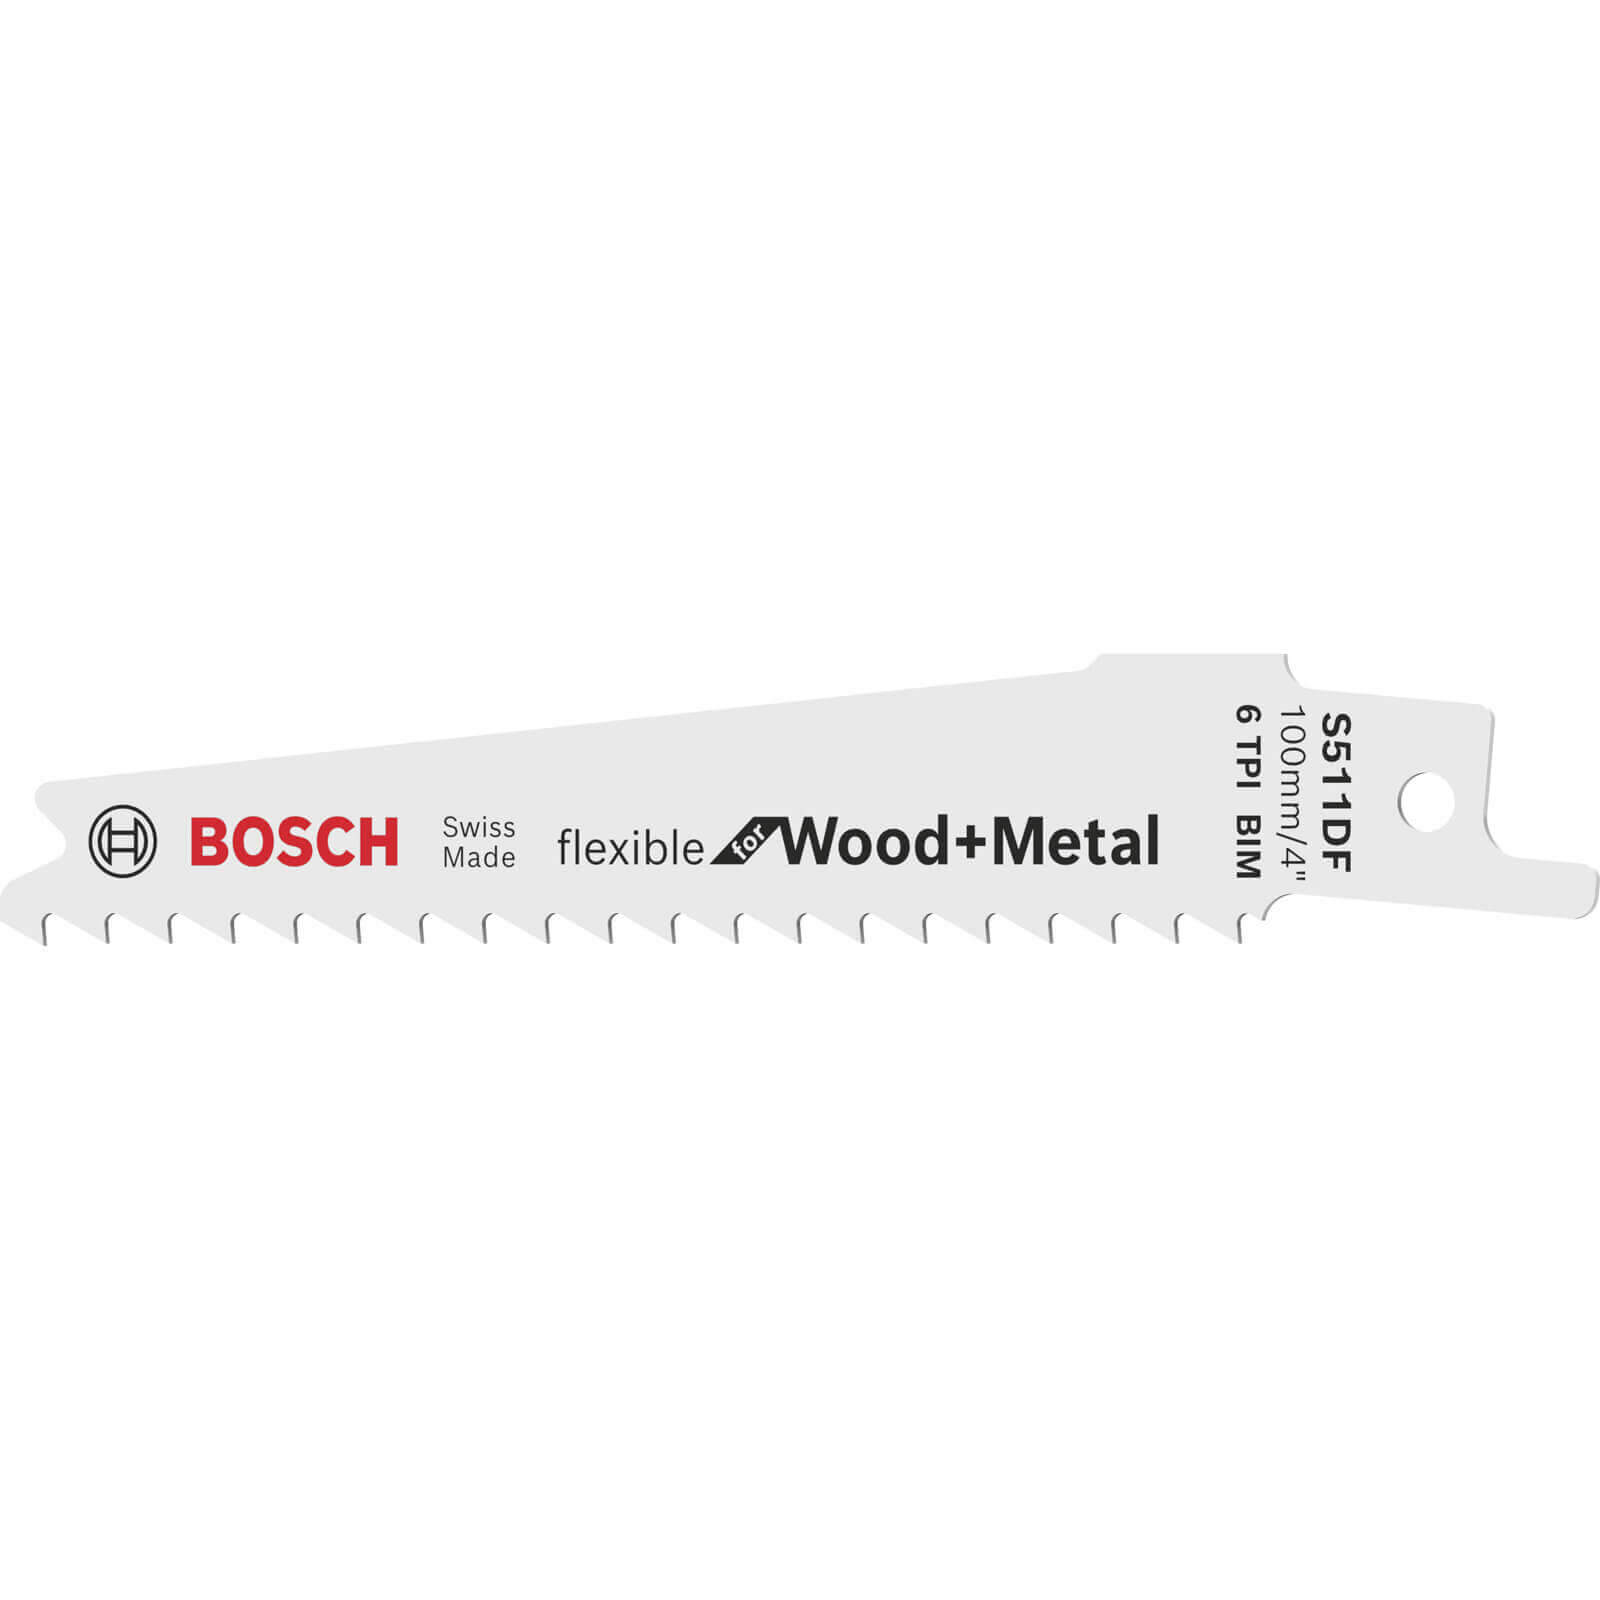 Photos - Power Tool Accessory Bosch S511DF Flexible Wood and Metal Cutting Reciprocating Sabre Saw Blade 